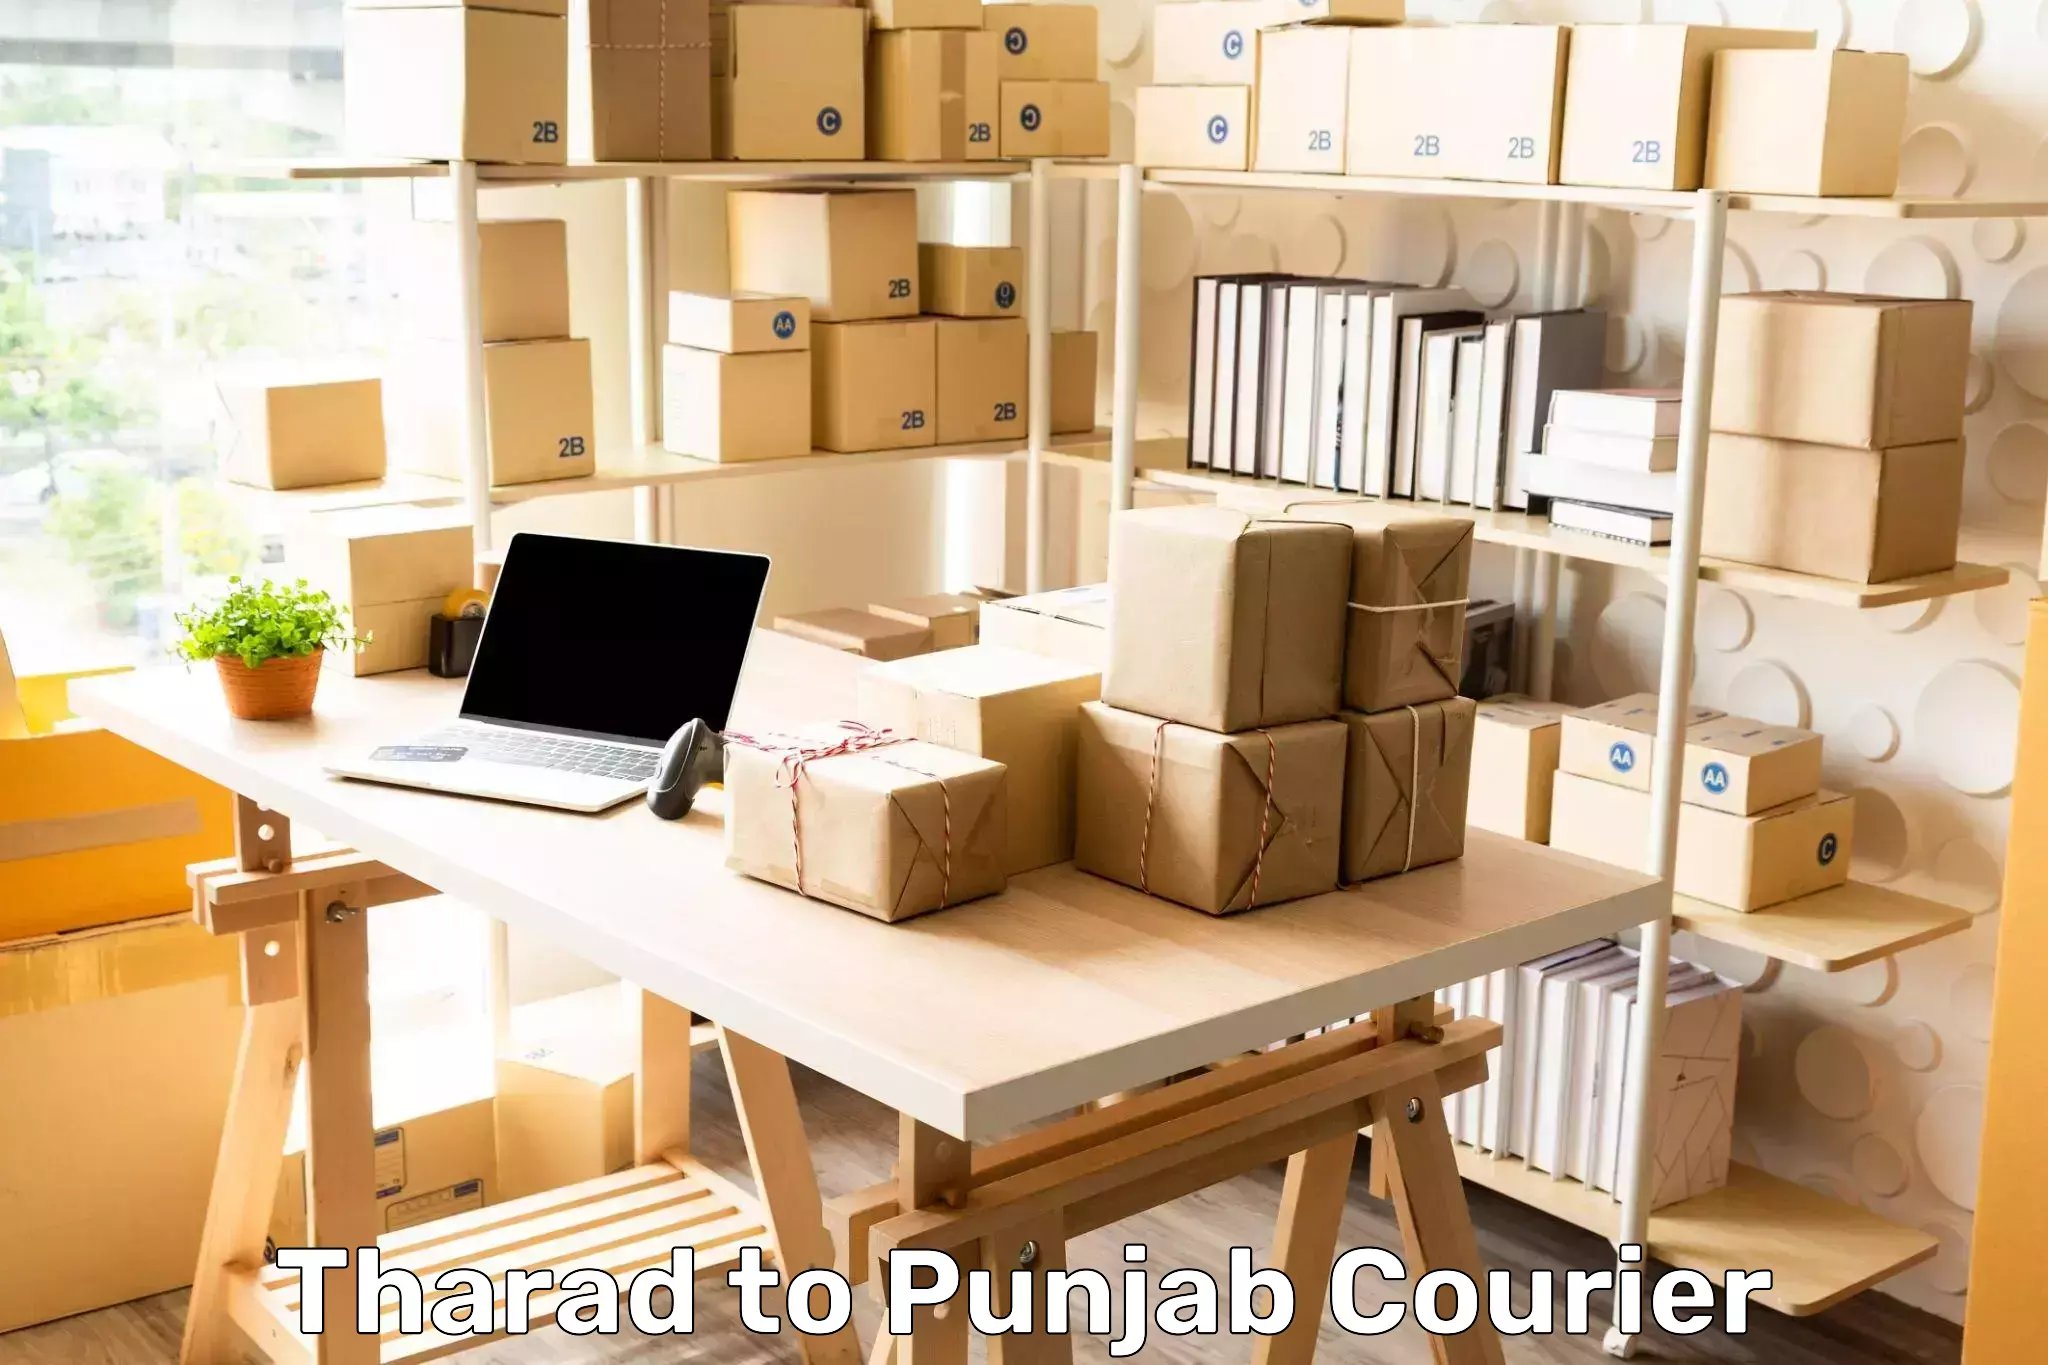 Full-service courier options Tharad to Ludhiana